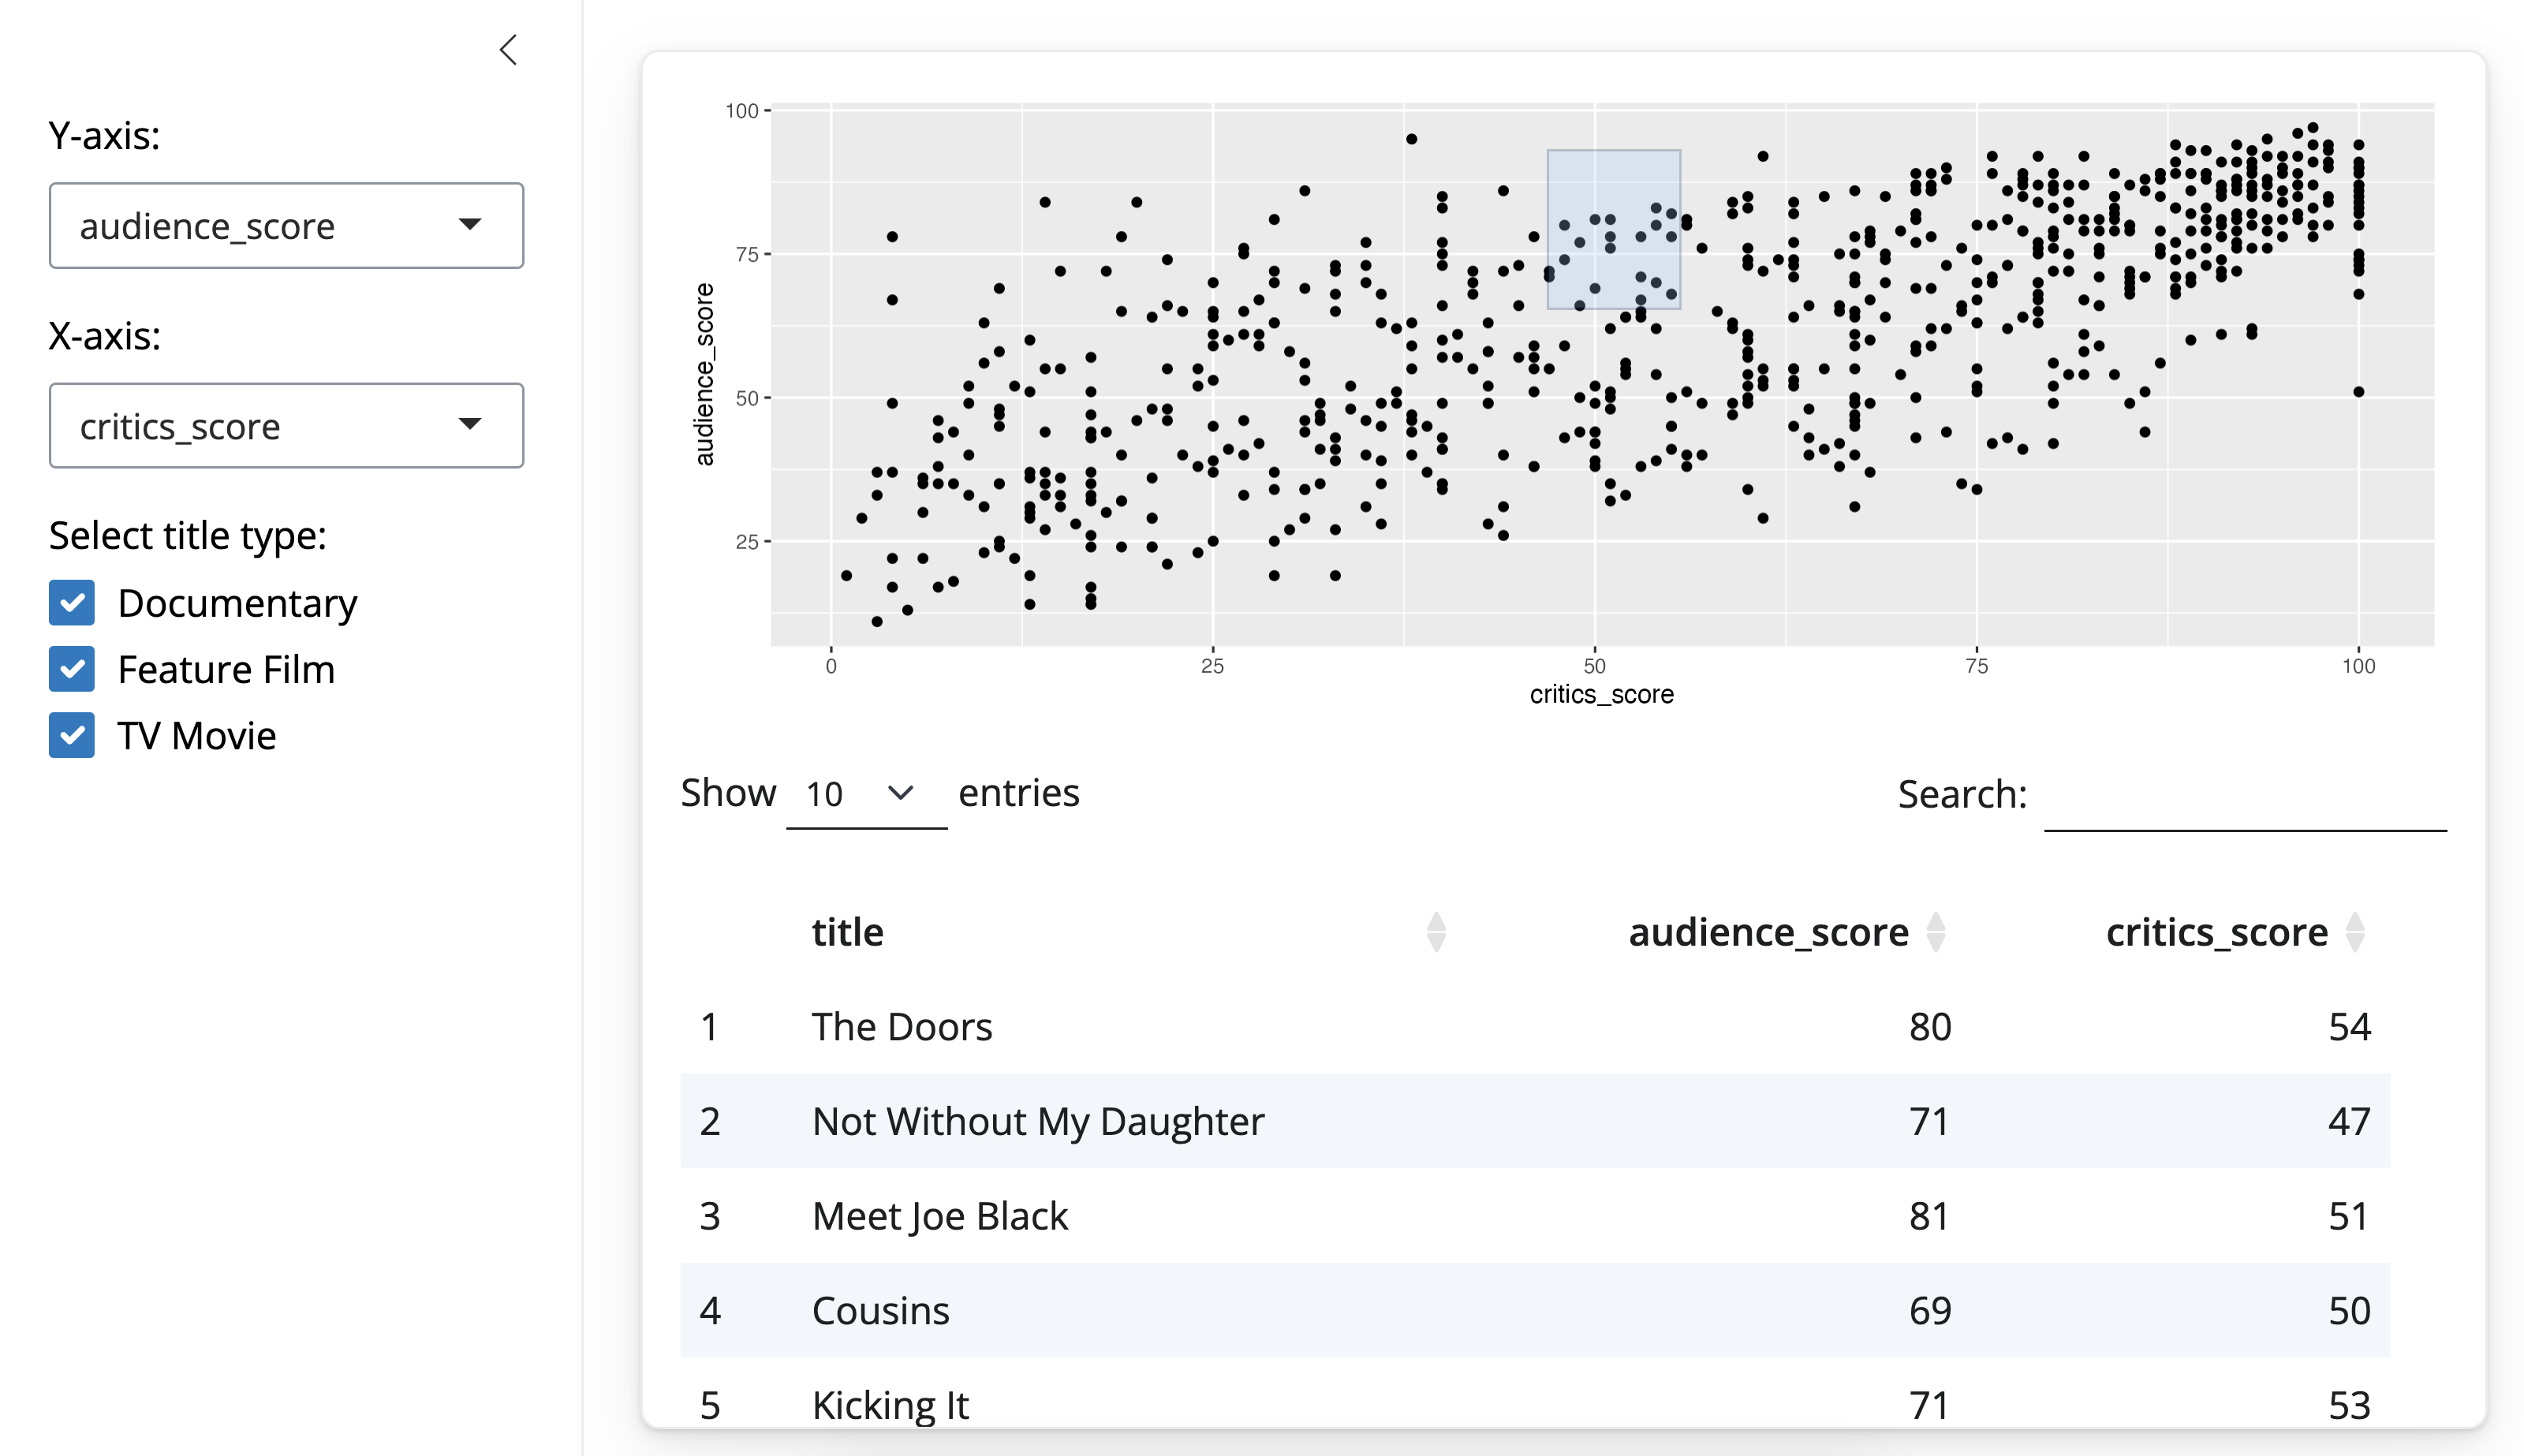 Our Shiny app with audience_score versus critics_score. A box is highlighting 5 points in the scatterplot. Below the plot is shown a table with the data for those 5 points with the columns title, audience_score and critics_score.